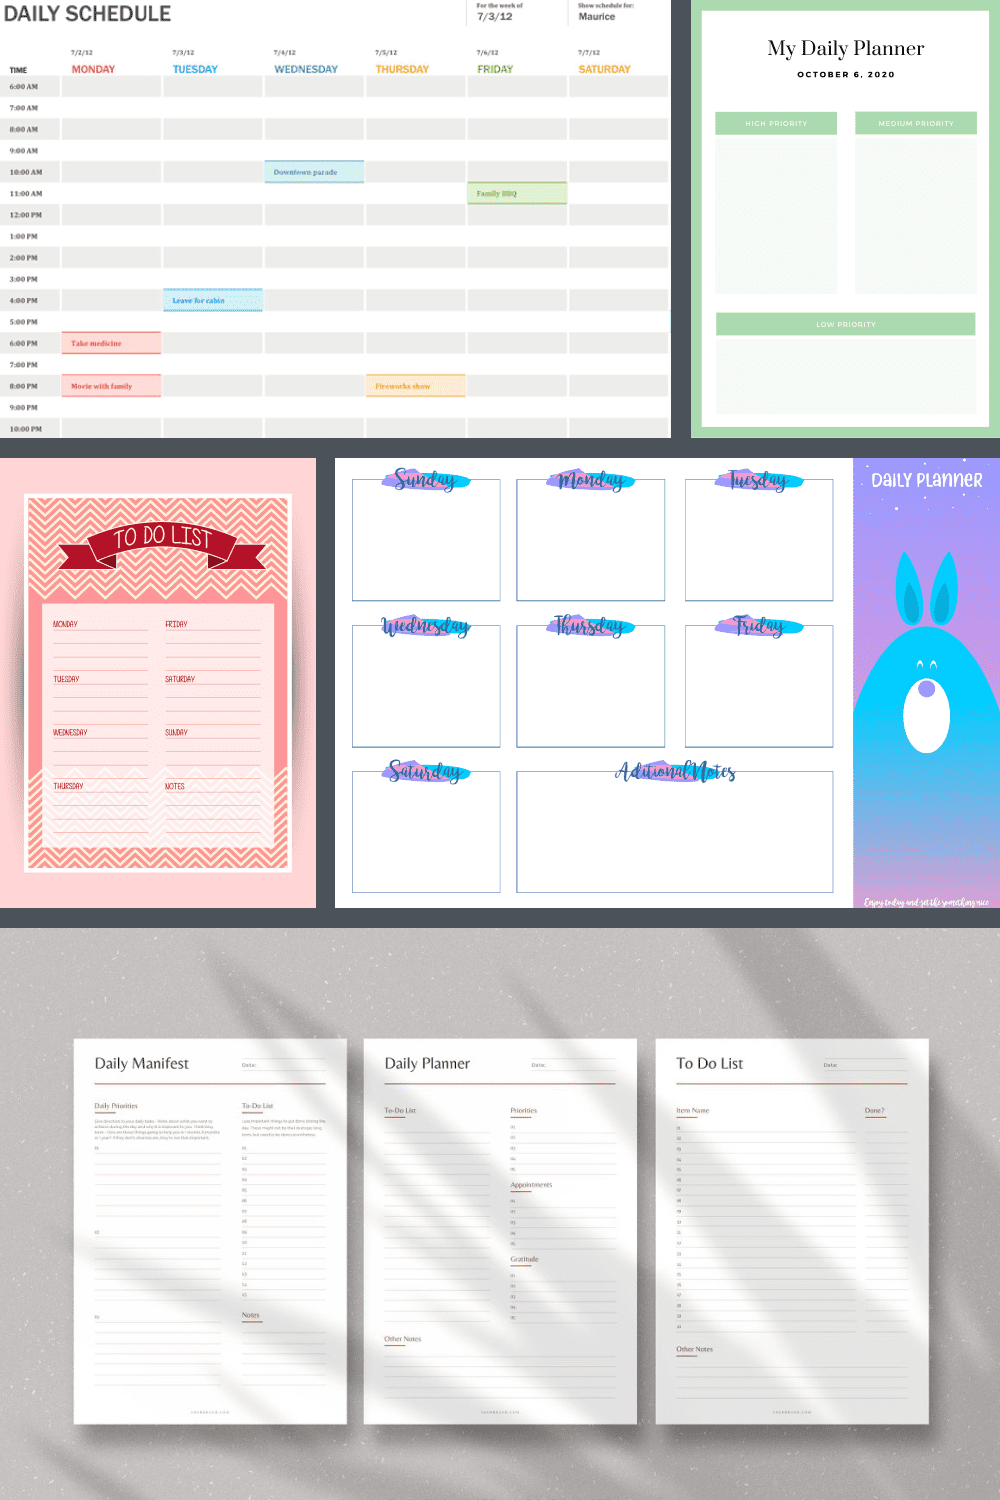 Daily Planner Templates Pinterest.